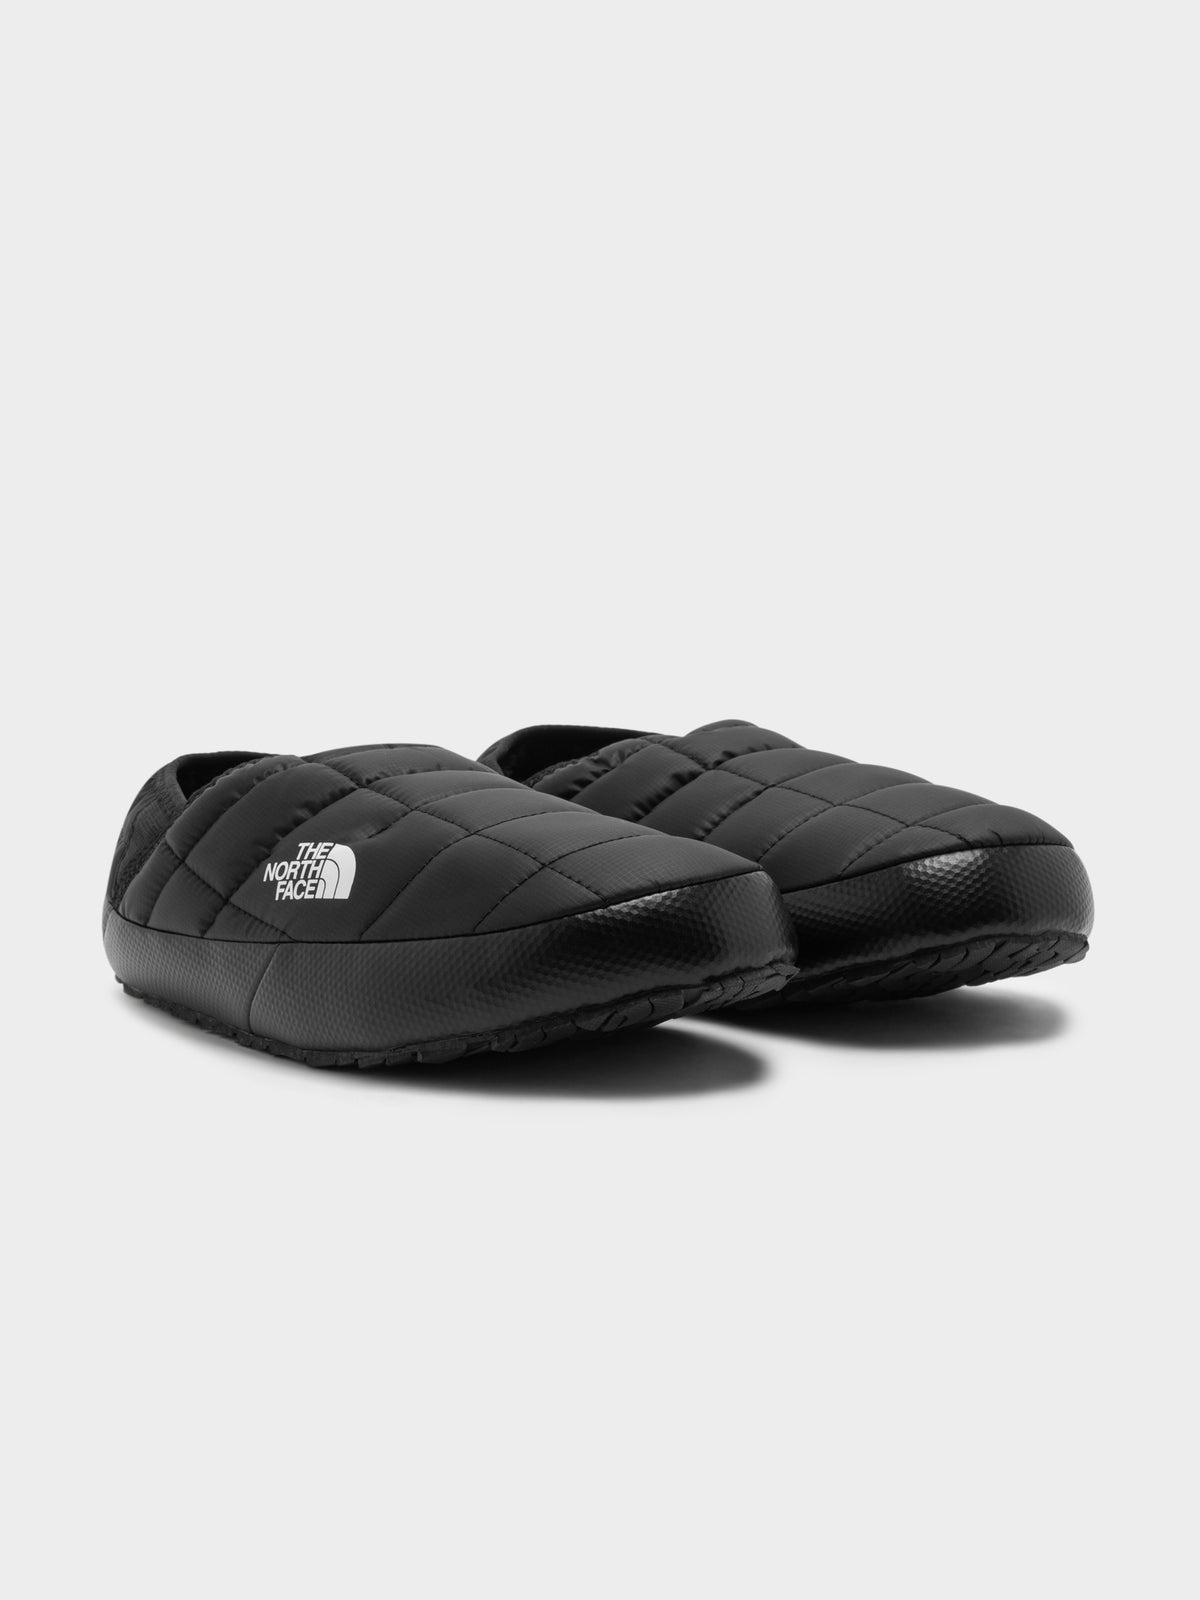 Womens Thermoball Traction Mule in TNF Black